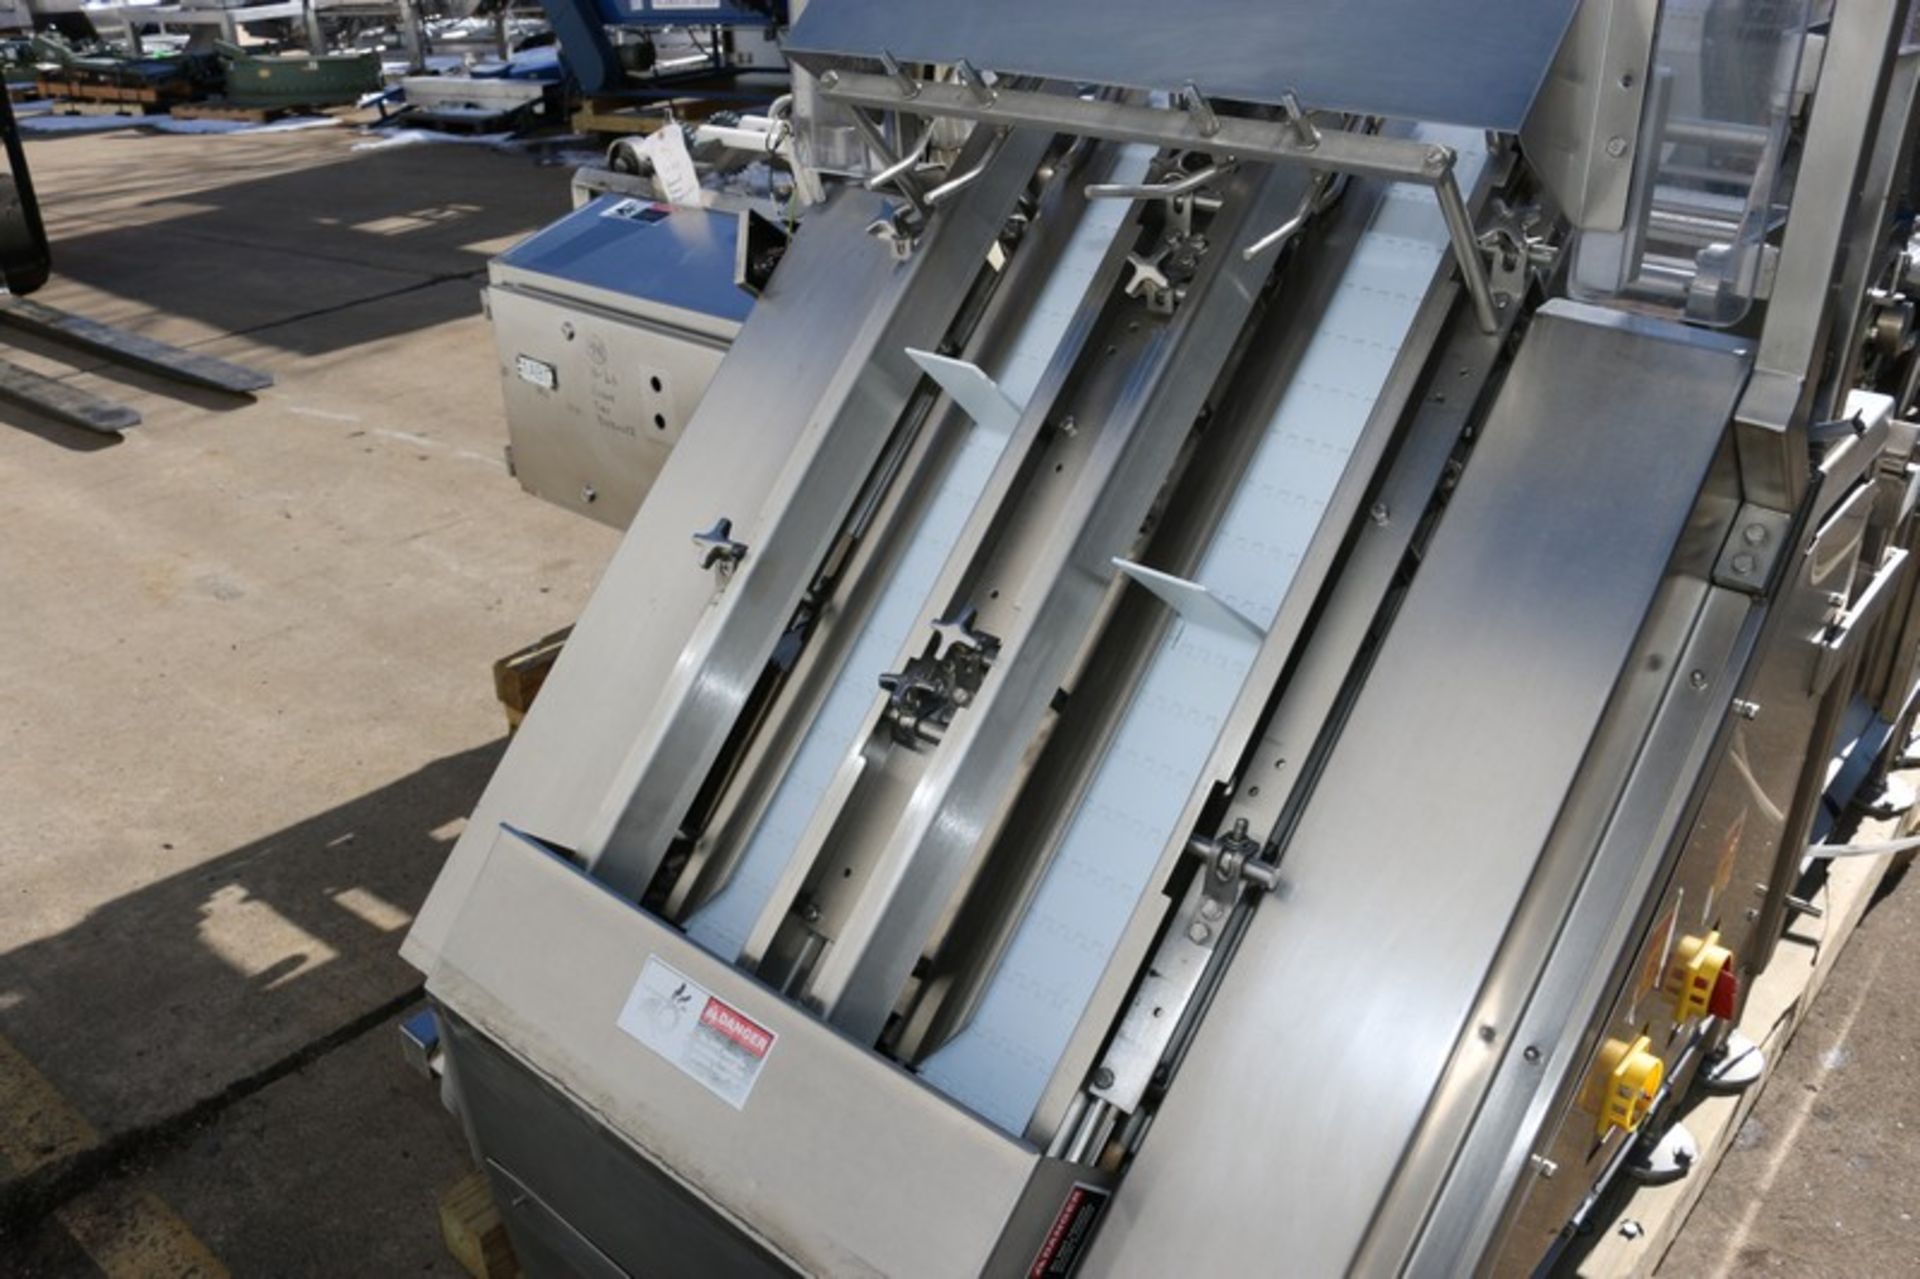 Raque S/S Tray Dispenser,2-Lanes of Aprox. 8" W Outfeed Conveyor, with 4-Head Pick N' Place Vacuum - Image 6 of 11